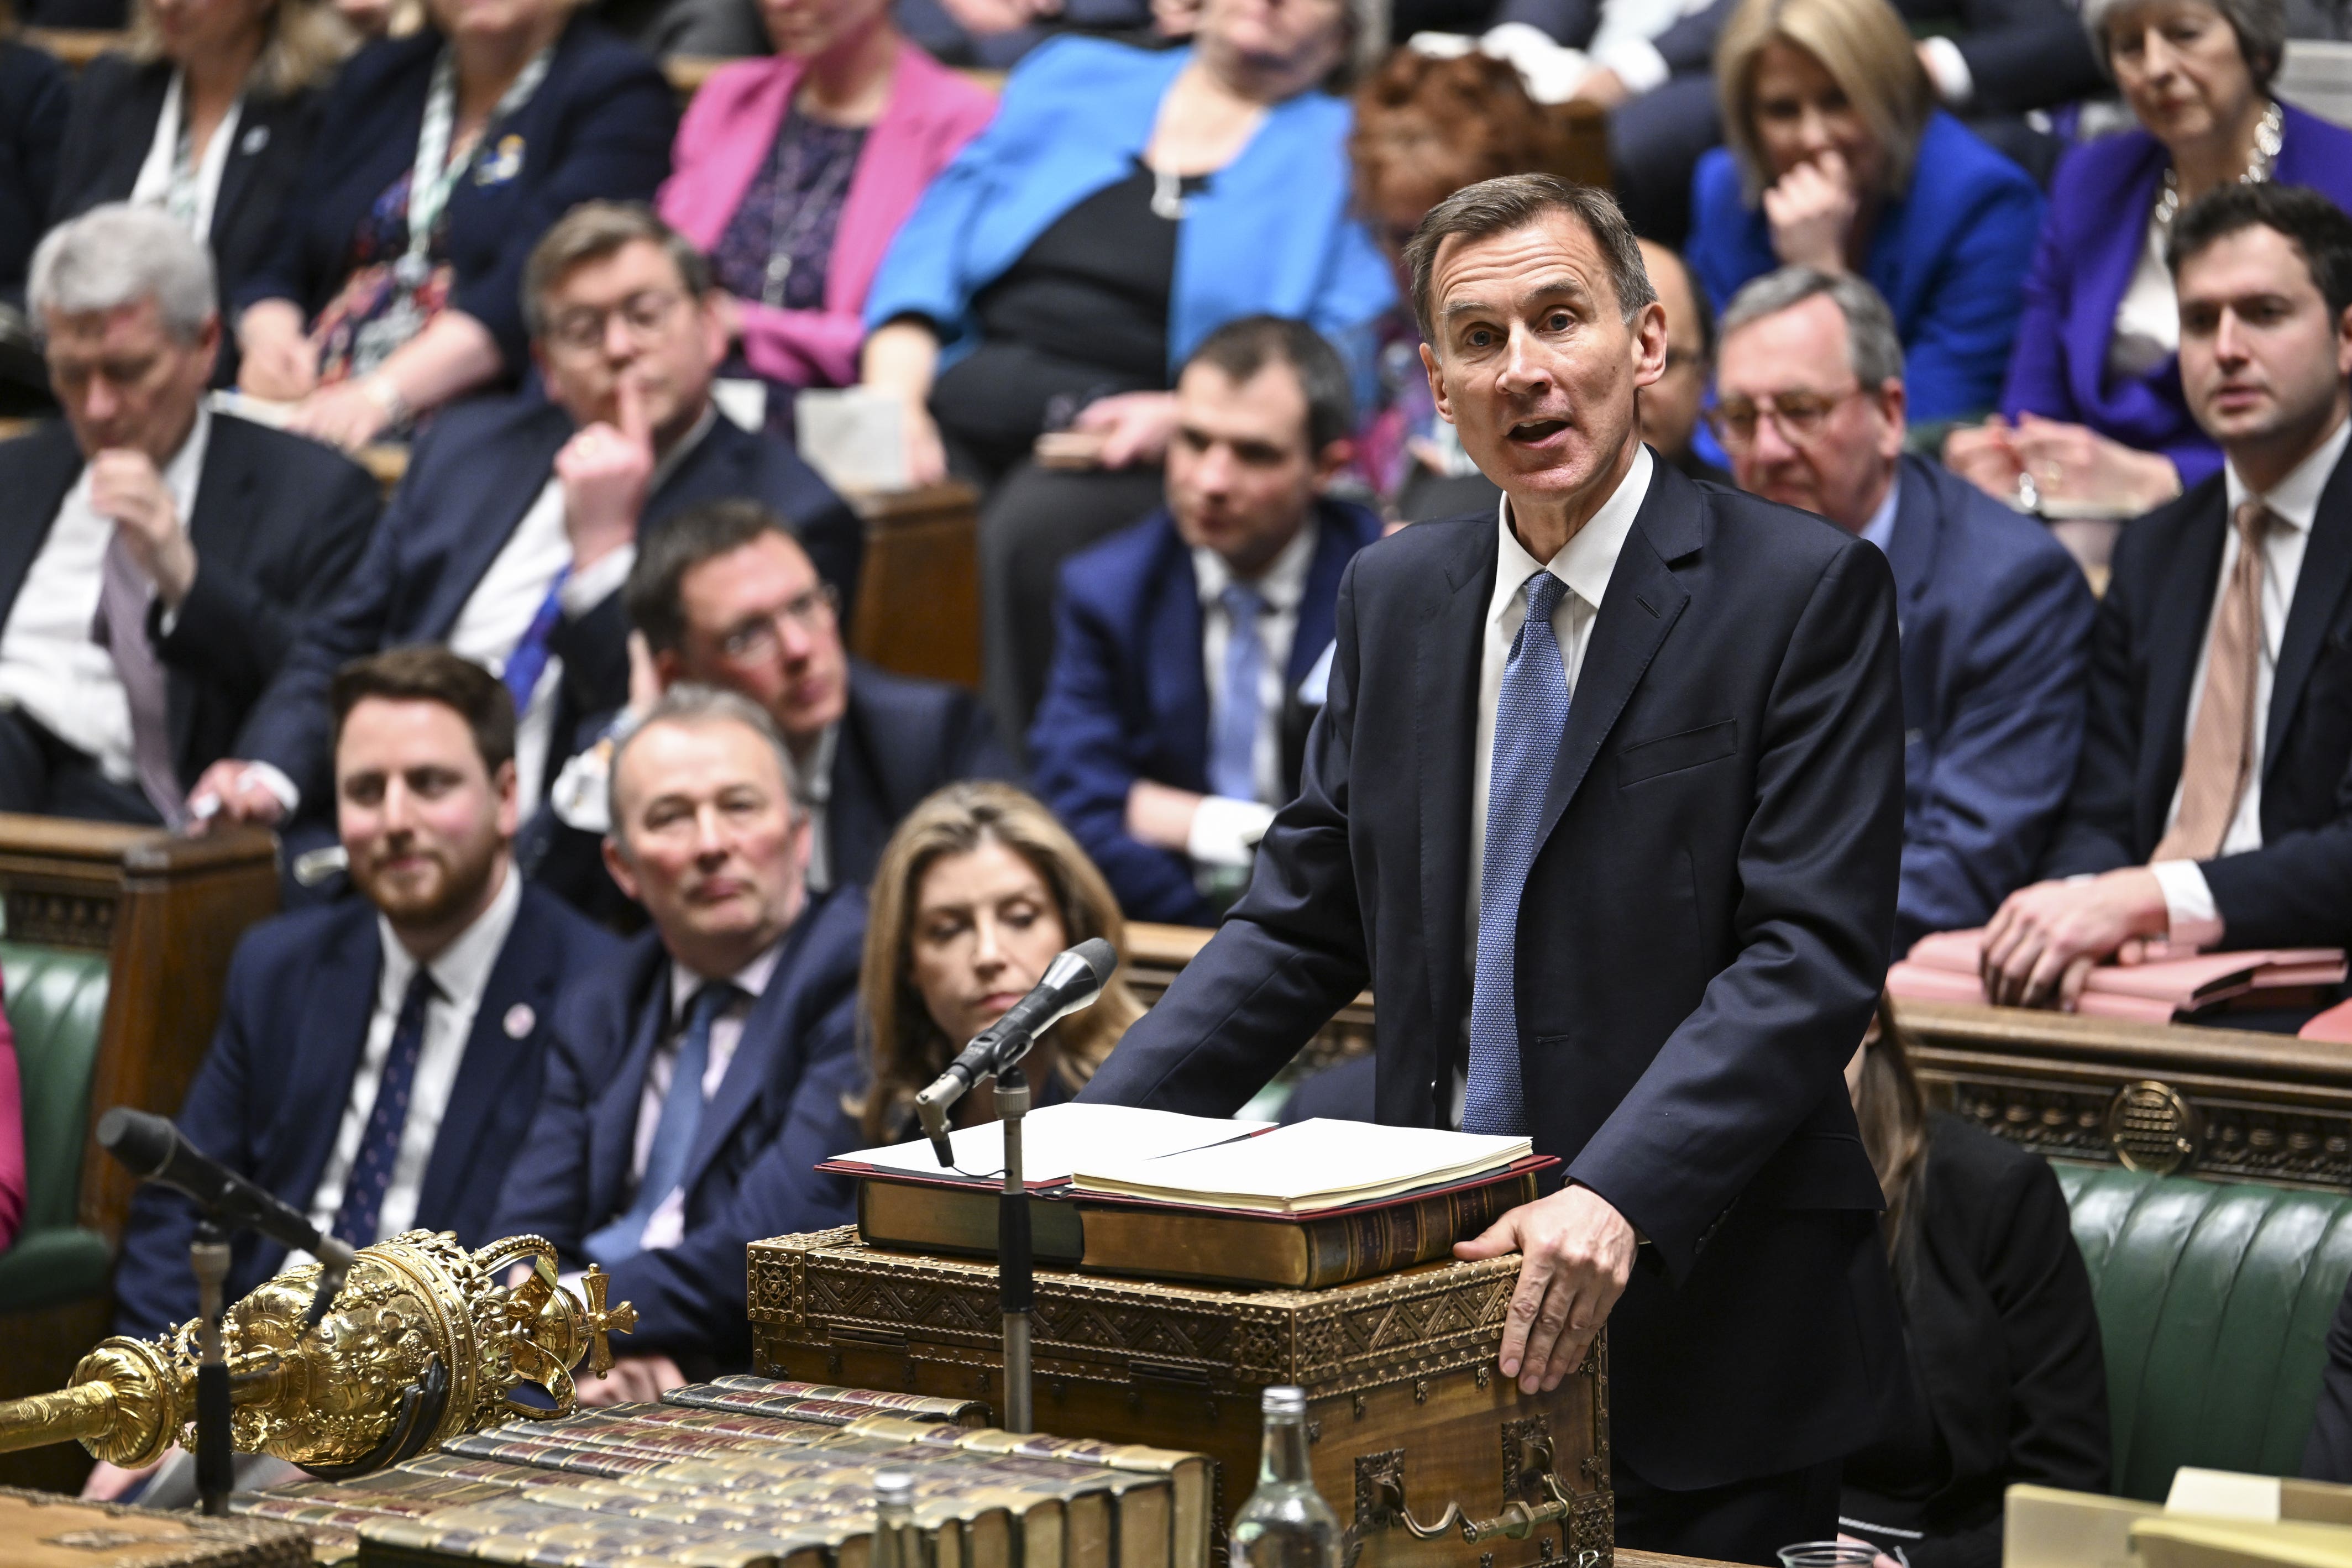 The chancellor has been lucky that international inflation is slowing down